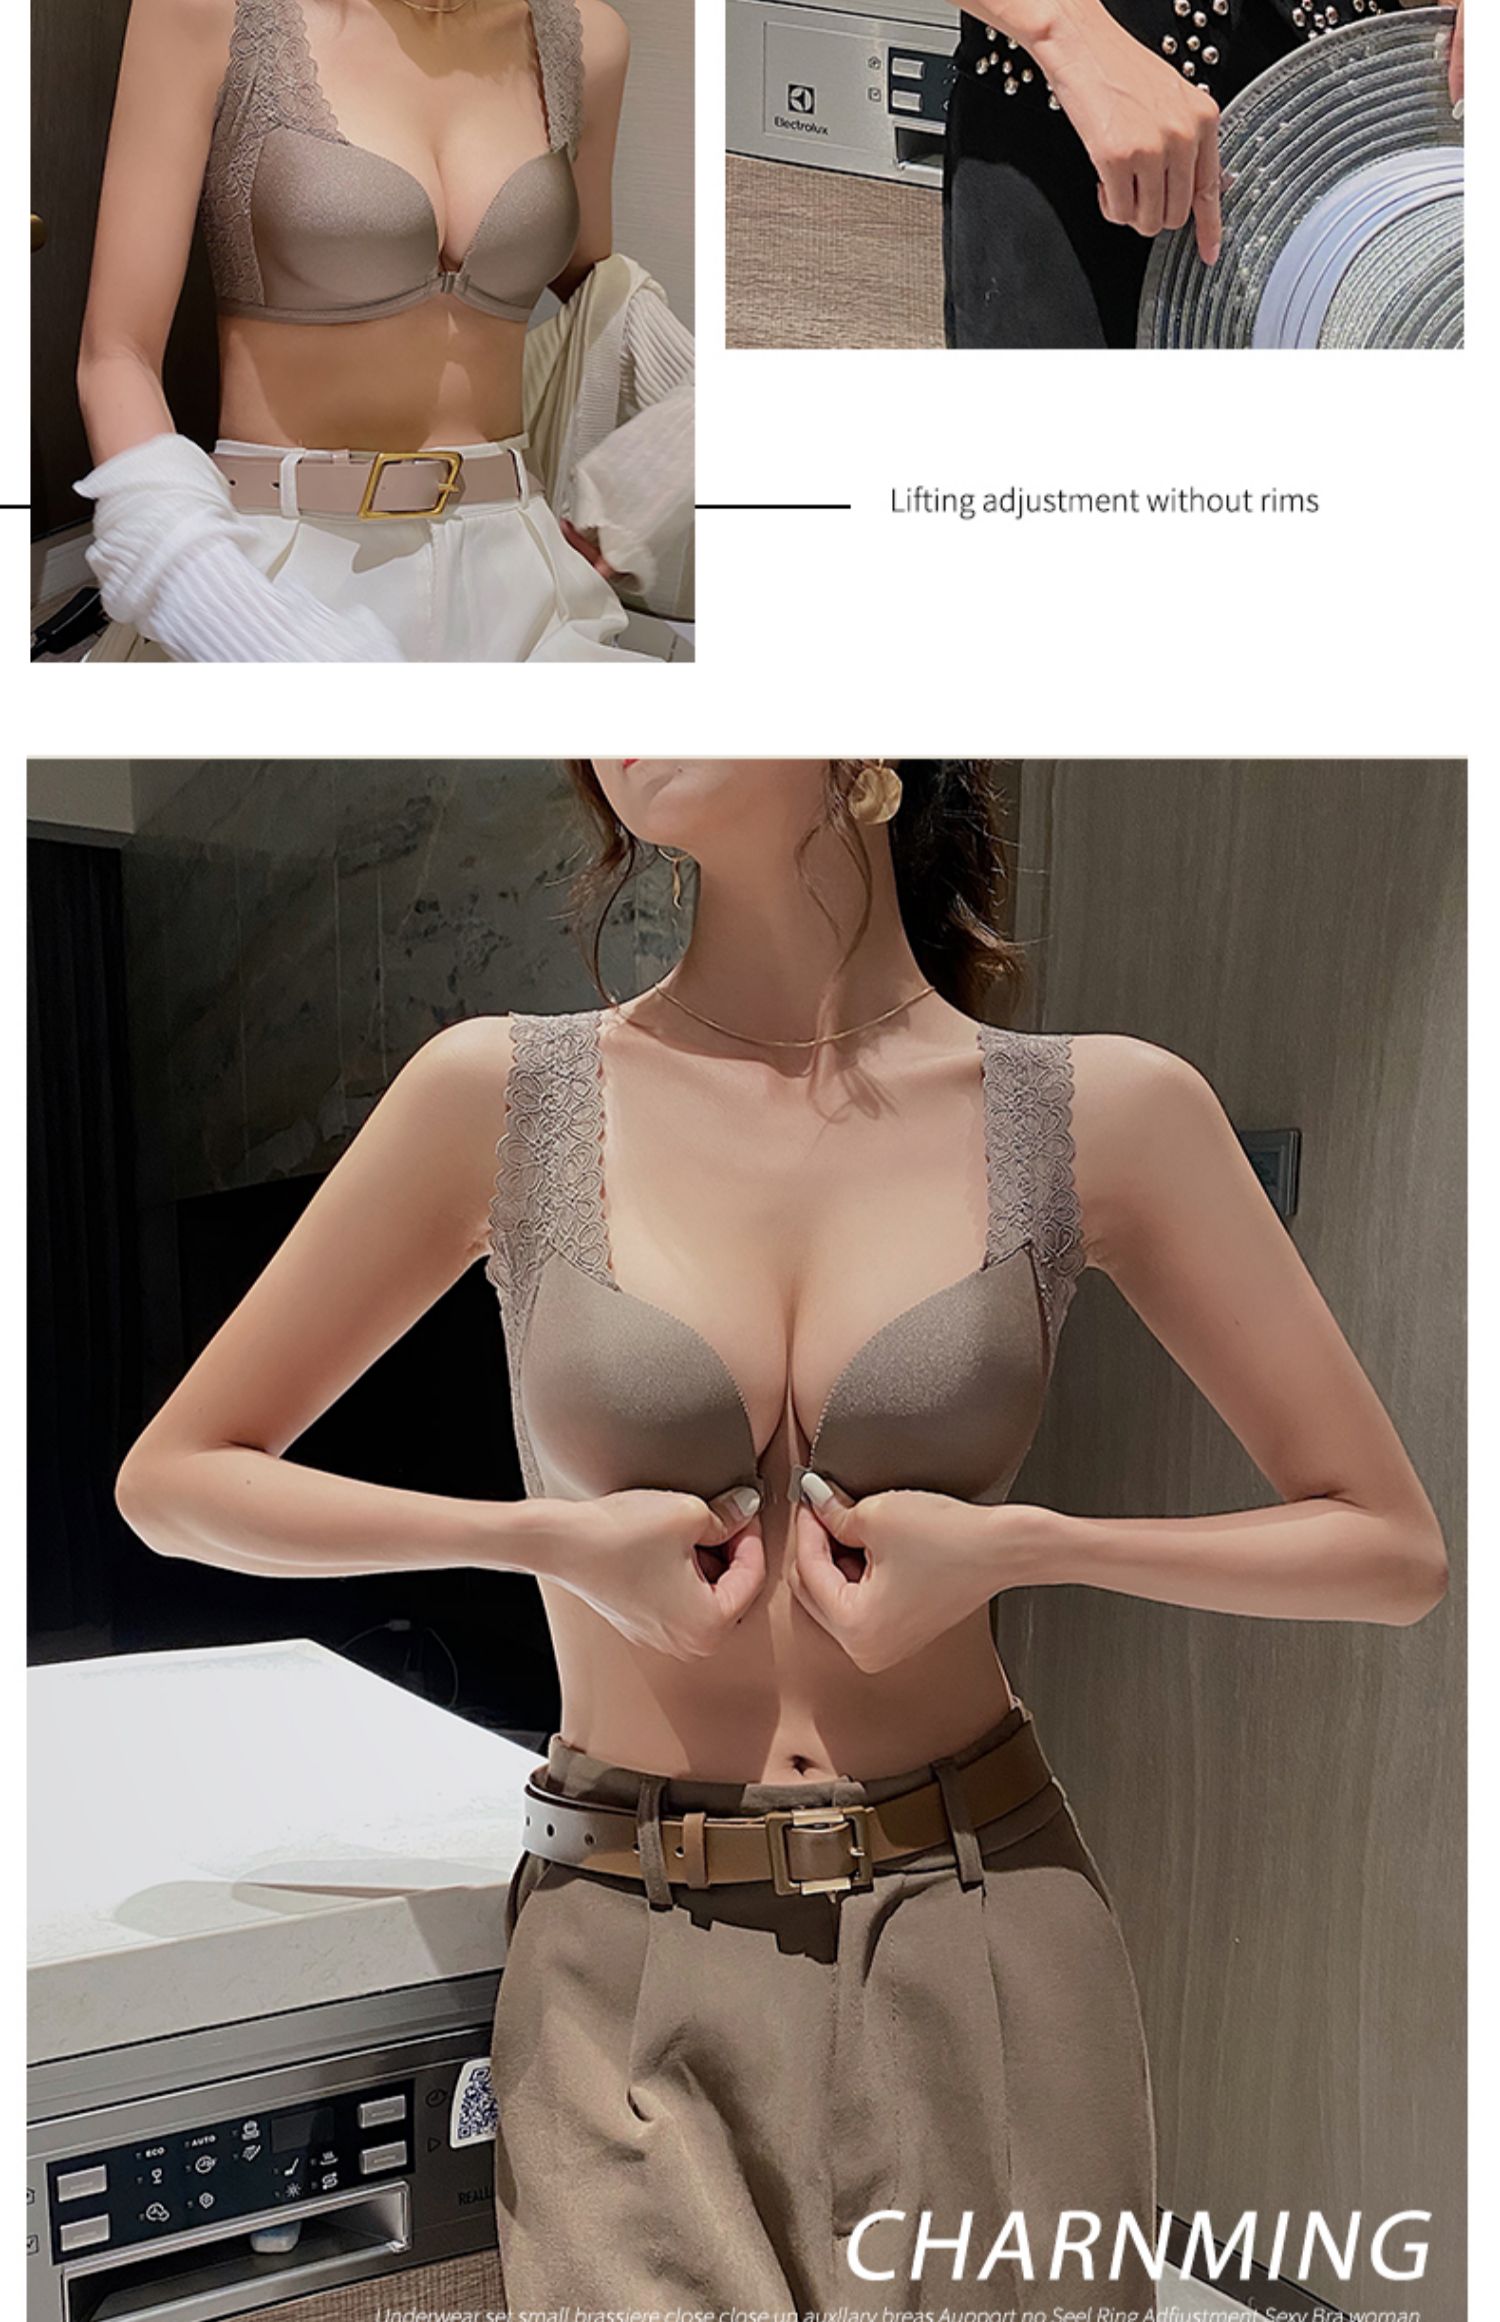 Womens Sexy Push Up No Steel Ring Small Chest Adjustable Bra